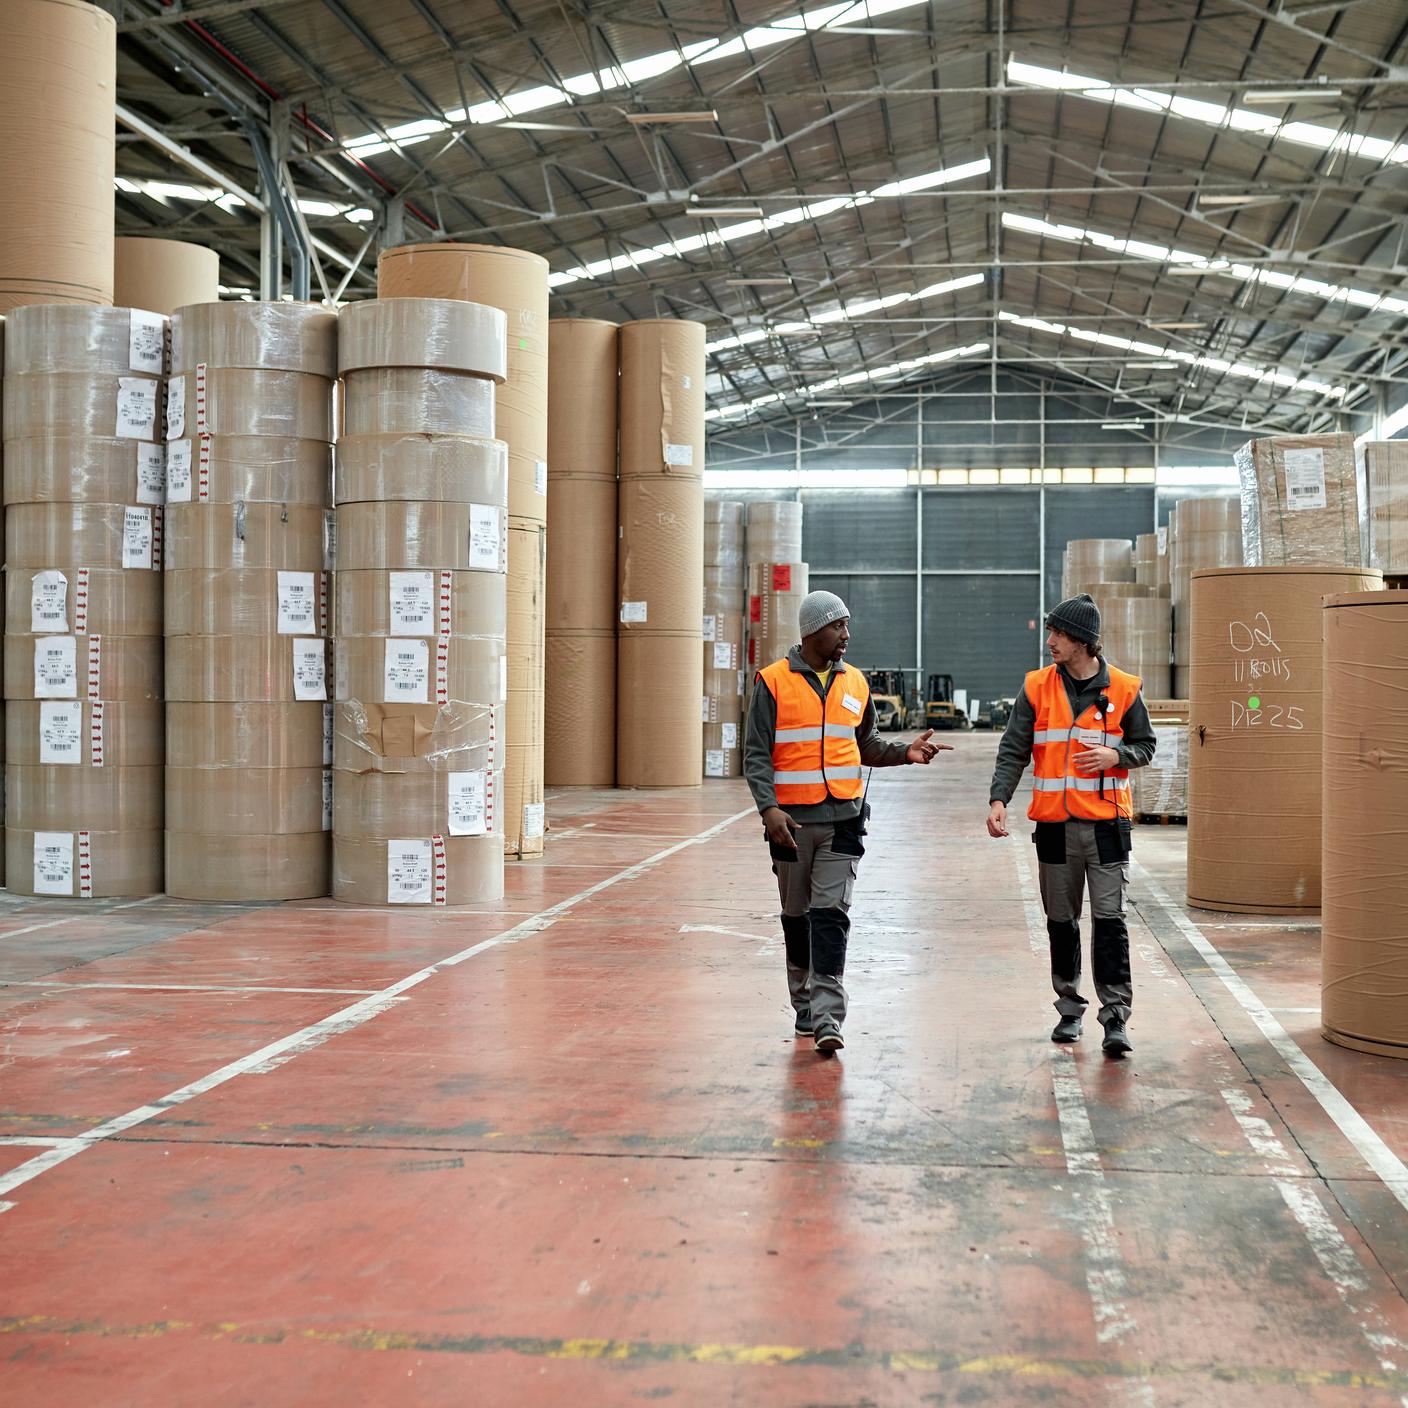 members of a trade association - two people walk towards camera in distribution center